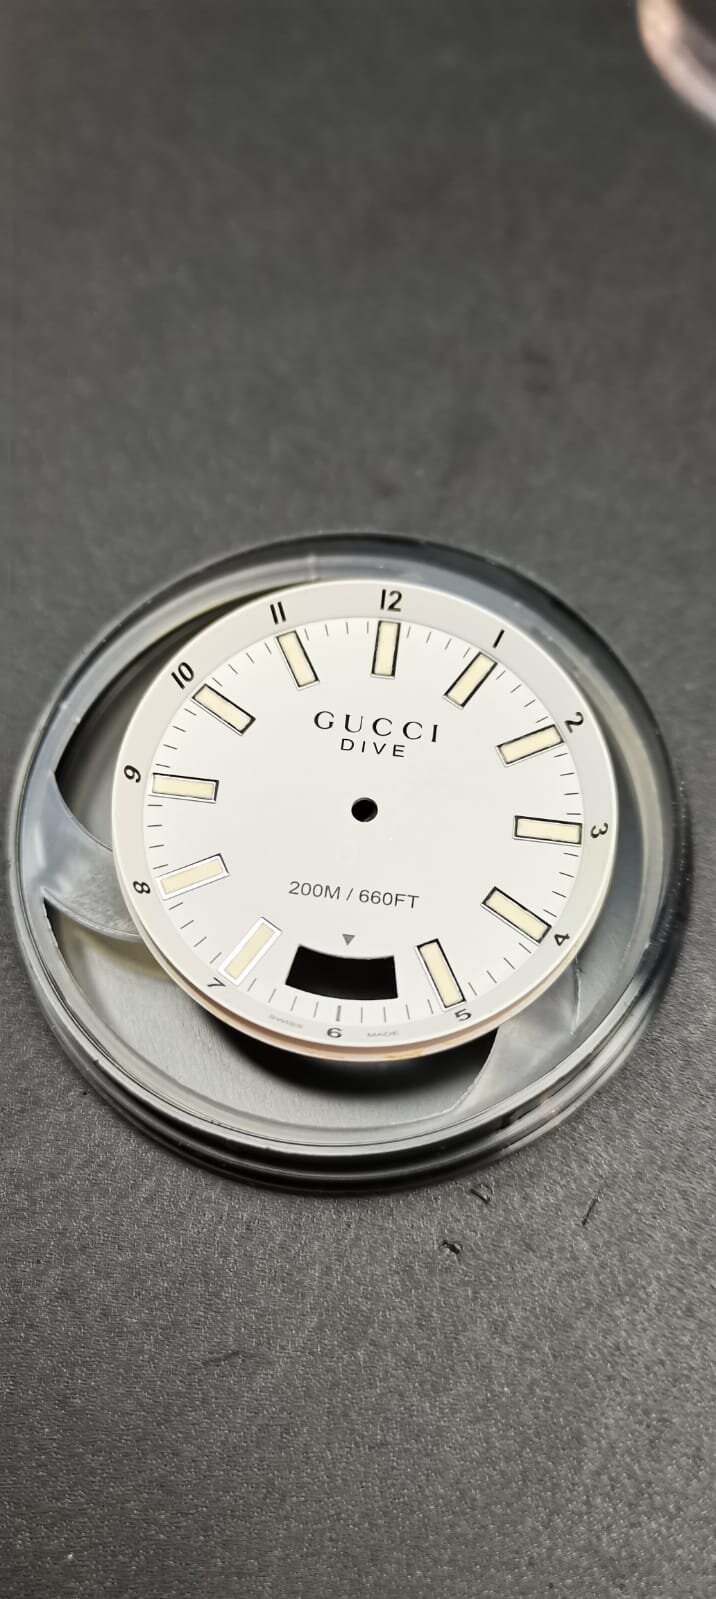 Gucci whaite dial with corroded batons cleaning restoring.jpeg